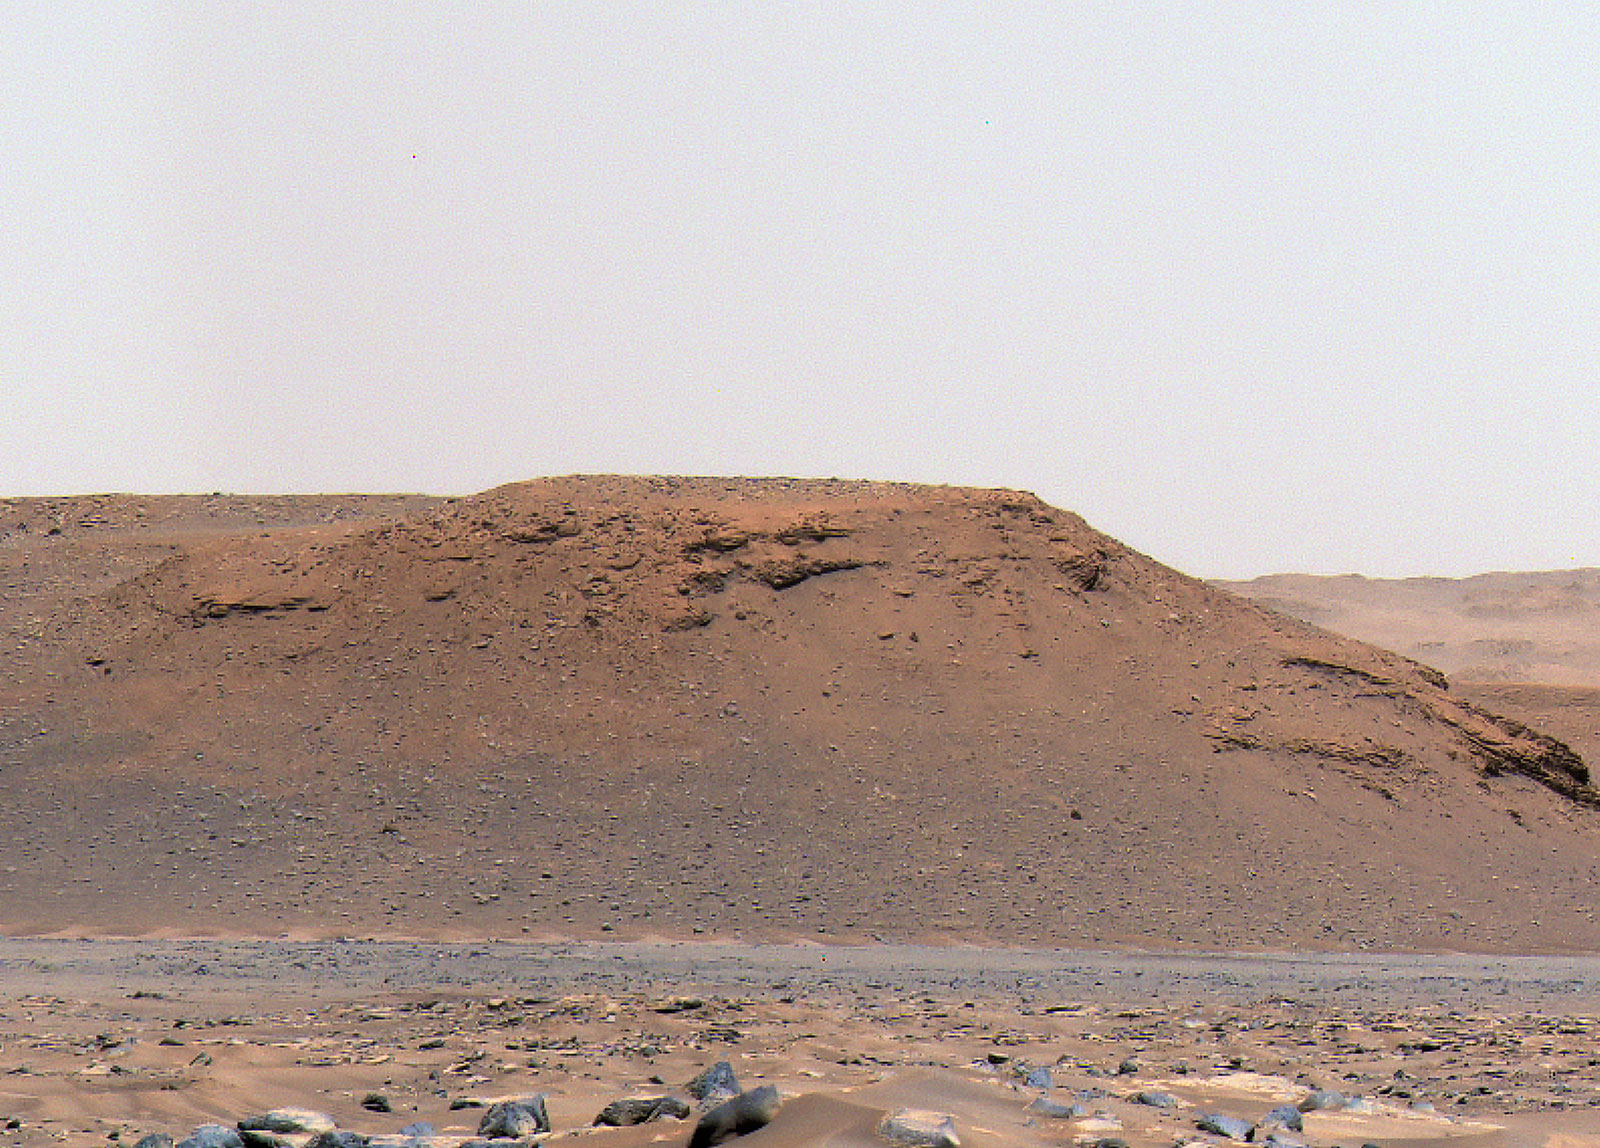 The escarpment the science team refers to as “Scarp a” is seen in this image captured by Perseverance rover’s Mastcam-Z instrument on Apr. 17, 2021.